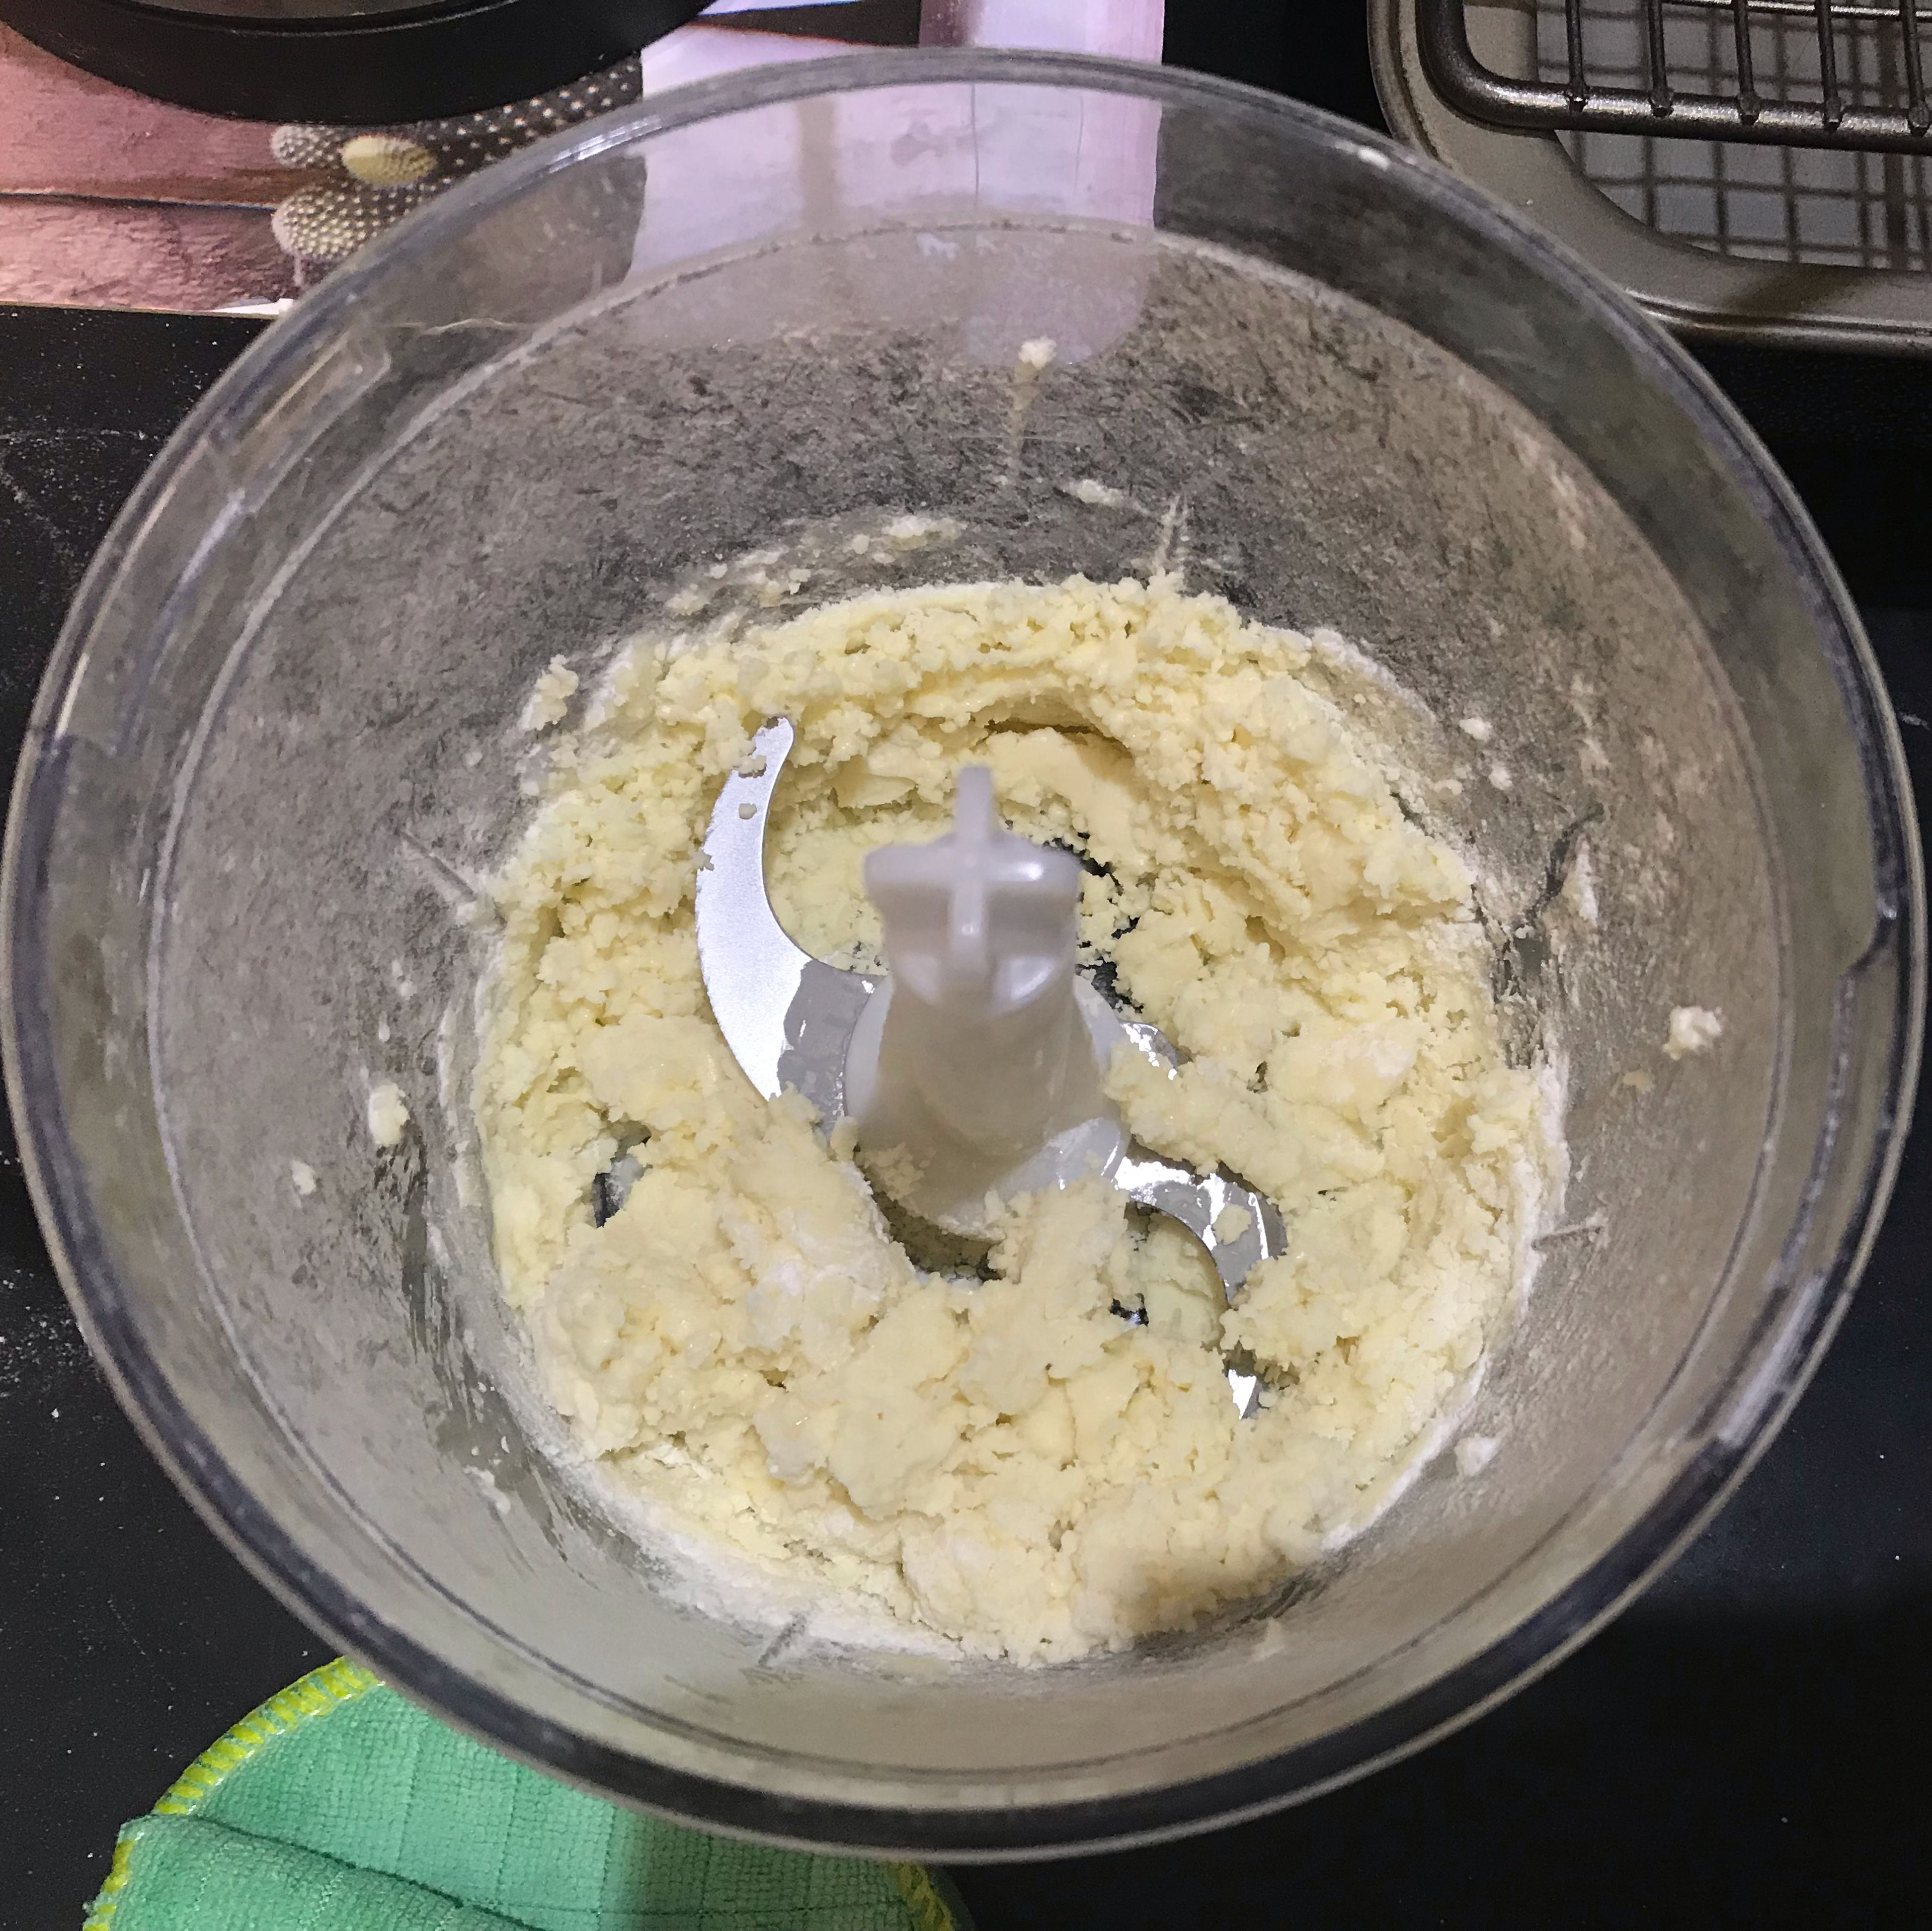 For the White Chocolate Snow, mix ingredients together in a food processor until powdery. Store in an airtight container until needed.